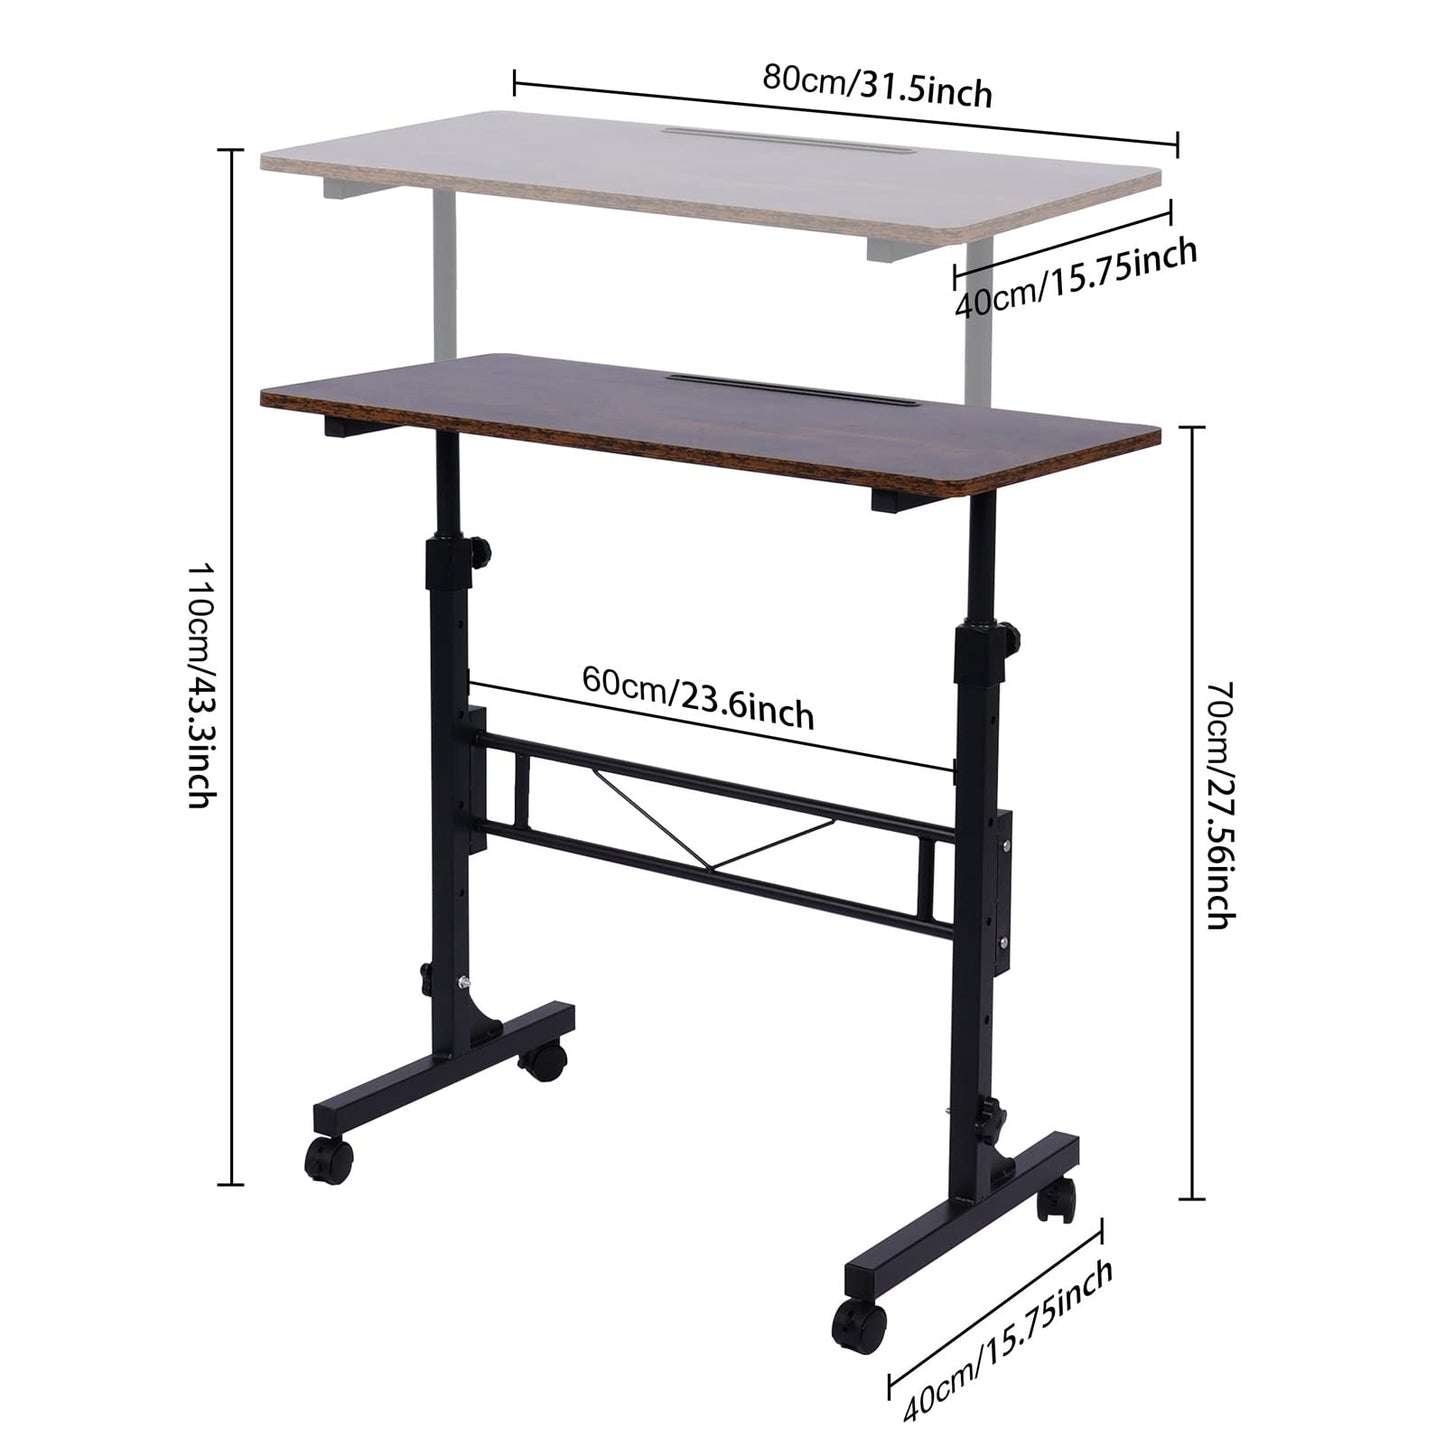 Standing Desk Adjustable Height, Mobile Stand Up Desk with Wheels Small Computer Desk Rolling Desk, Portable Laptop Desk Rustic Standing Table Sit Stand Home Office Desks 16"x31.5" Height 27"-43.5"